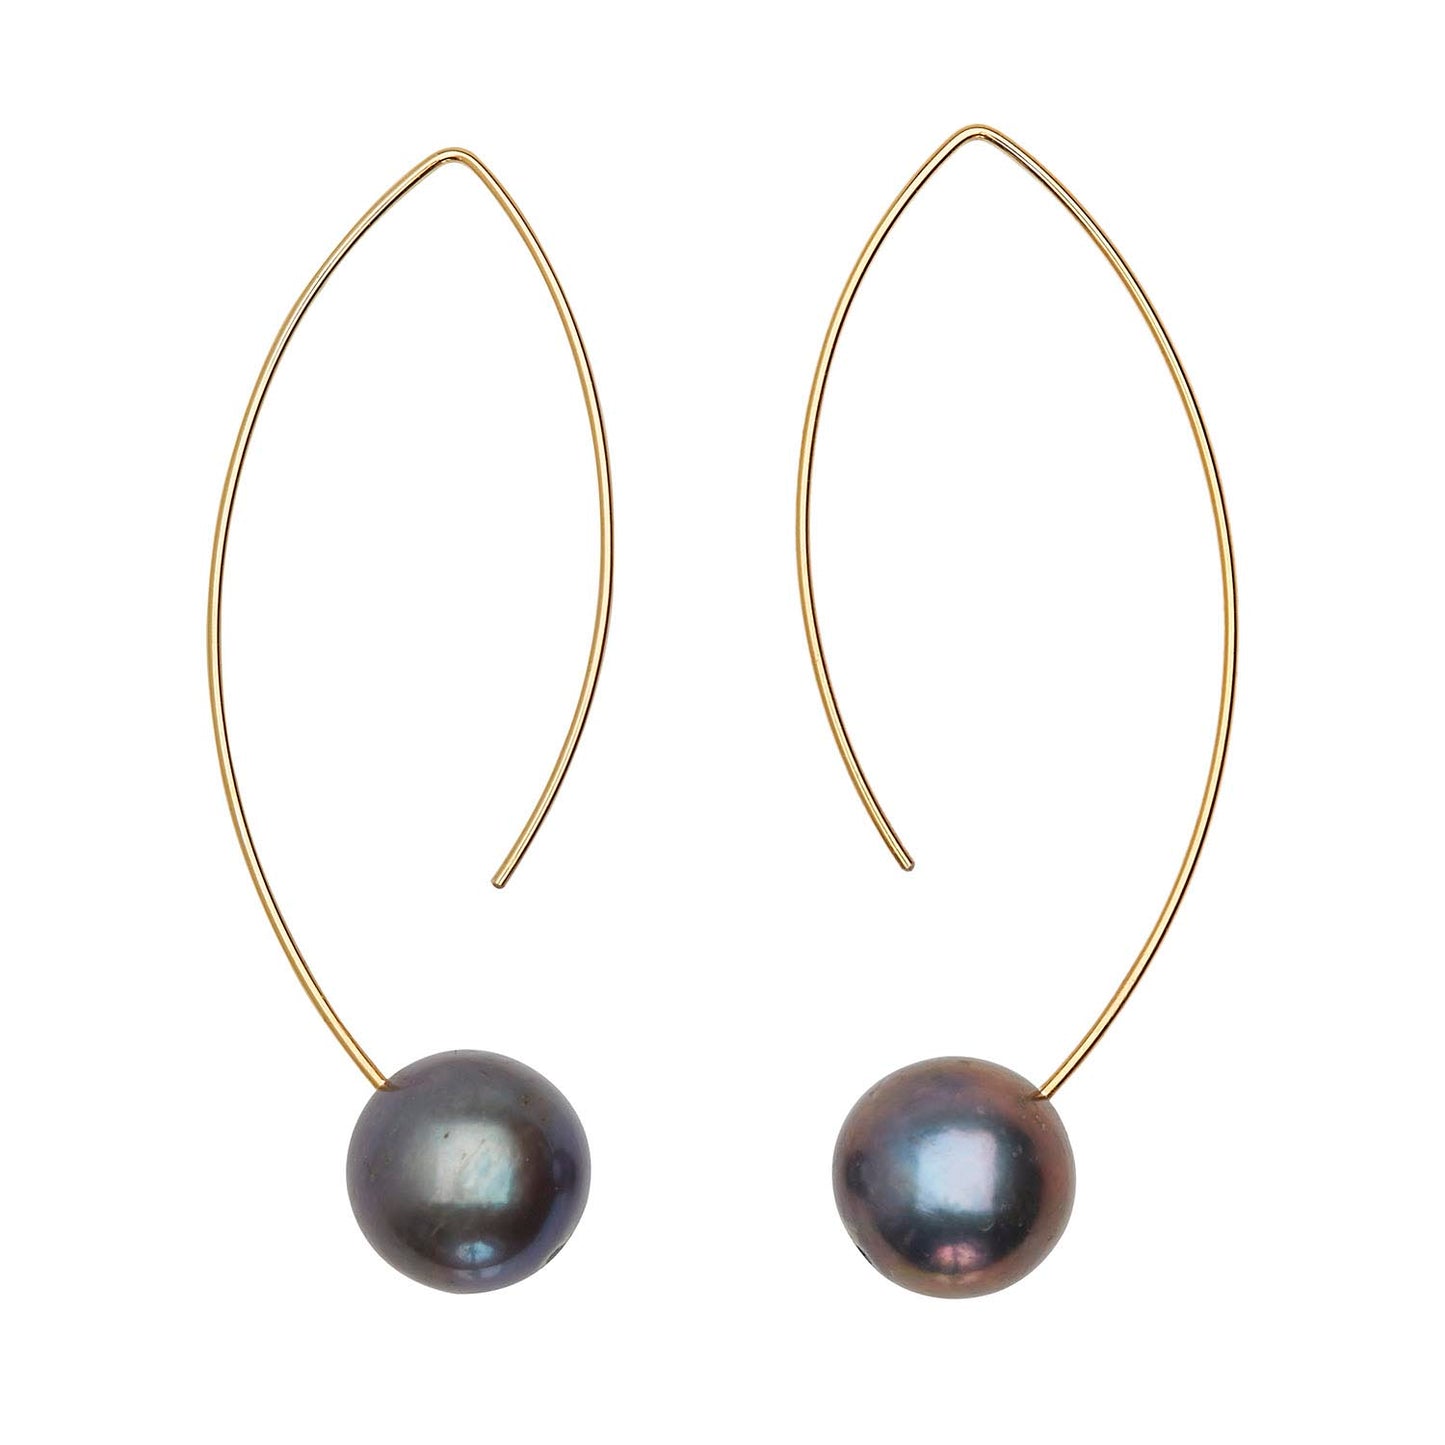 Long Curve Earrings with Peacock Pearls